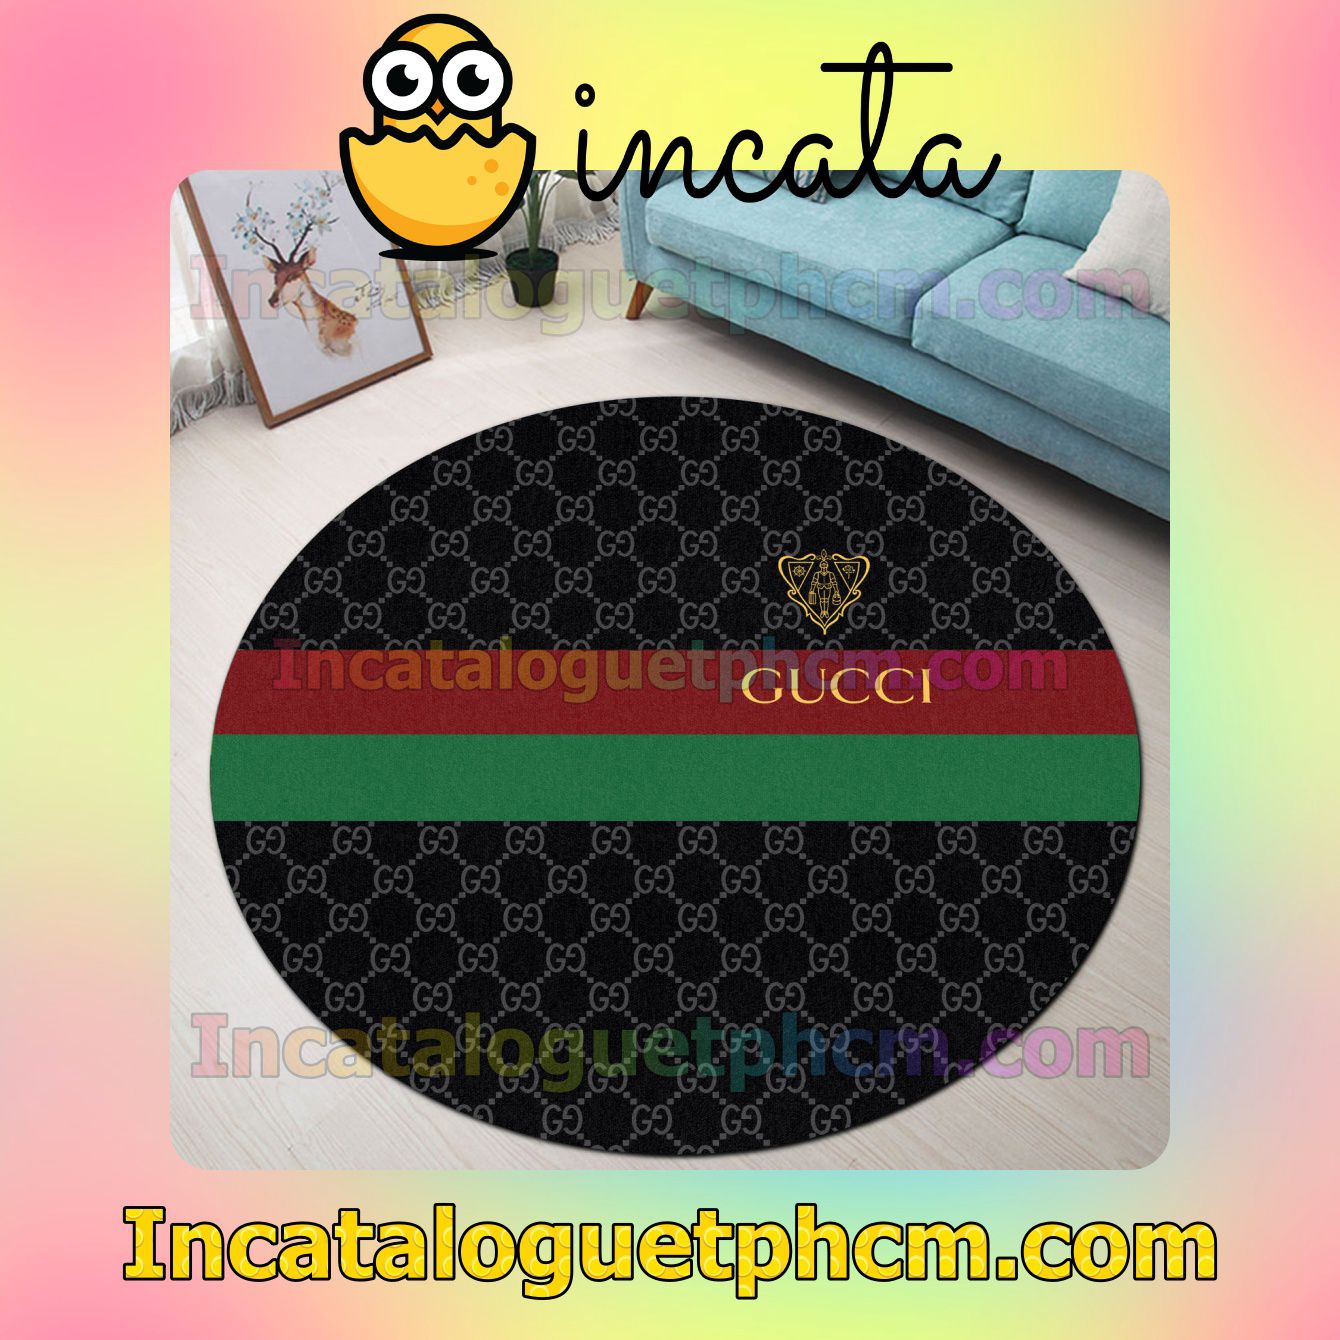 Gucci Black Monogram With Museo Logo Red And Green Stripes Round Carpet Rugs For Kitchen